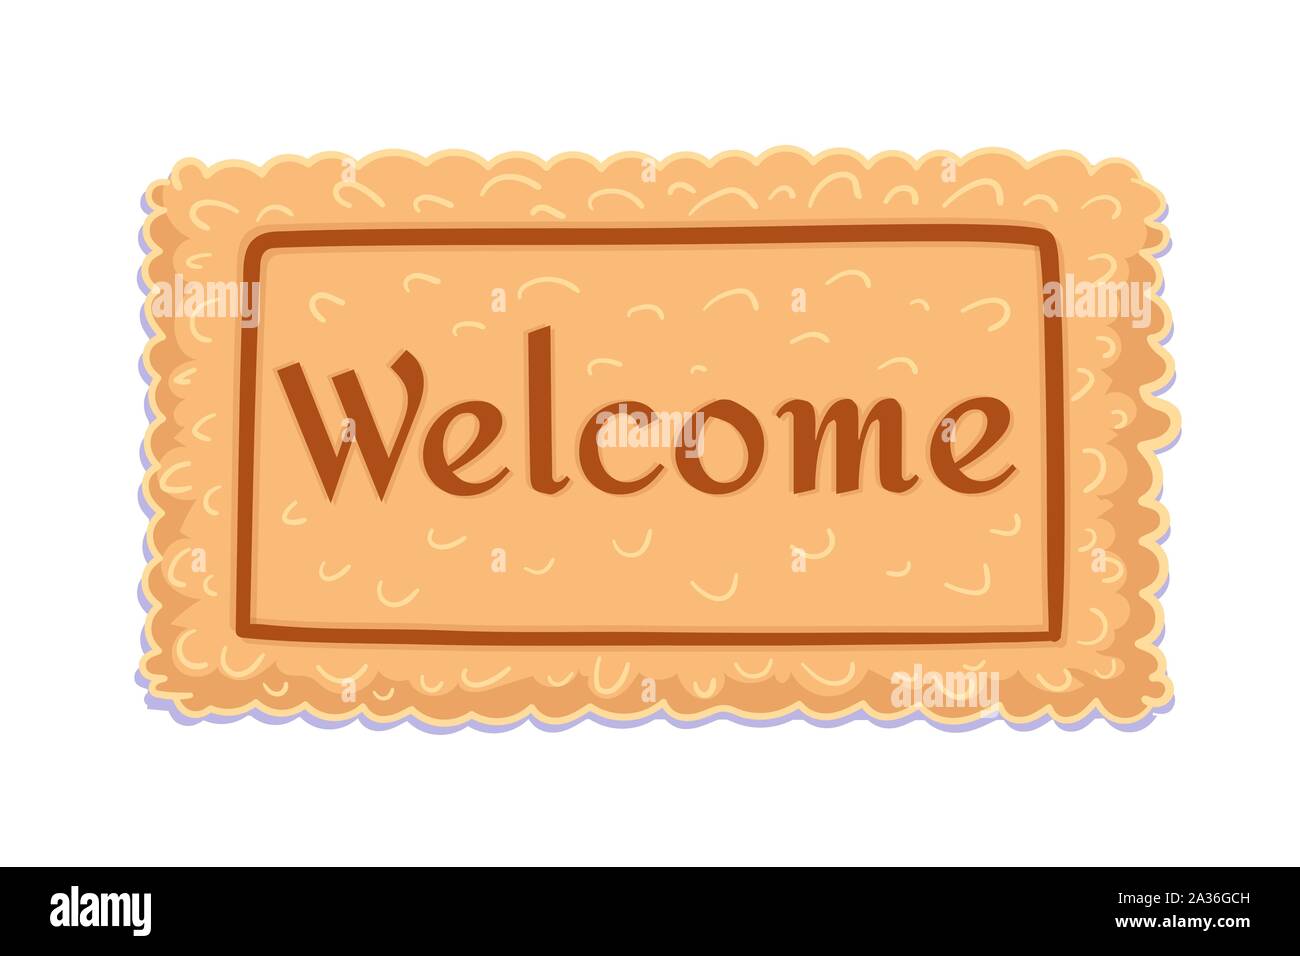 https://c8.alamy.com/comp/2A36GCH/welcome-flat-doormat-for-decoration-design-element-of-home-decor-carpet-with-the-text-isolated-on-white-background-welcome-greeting-and-invitation-to-come-in-vector-illustration-2A36GCH.jpg